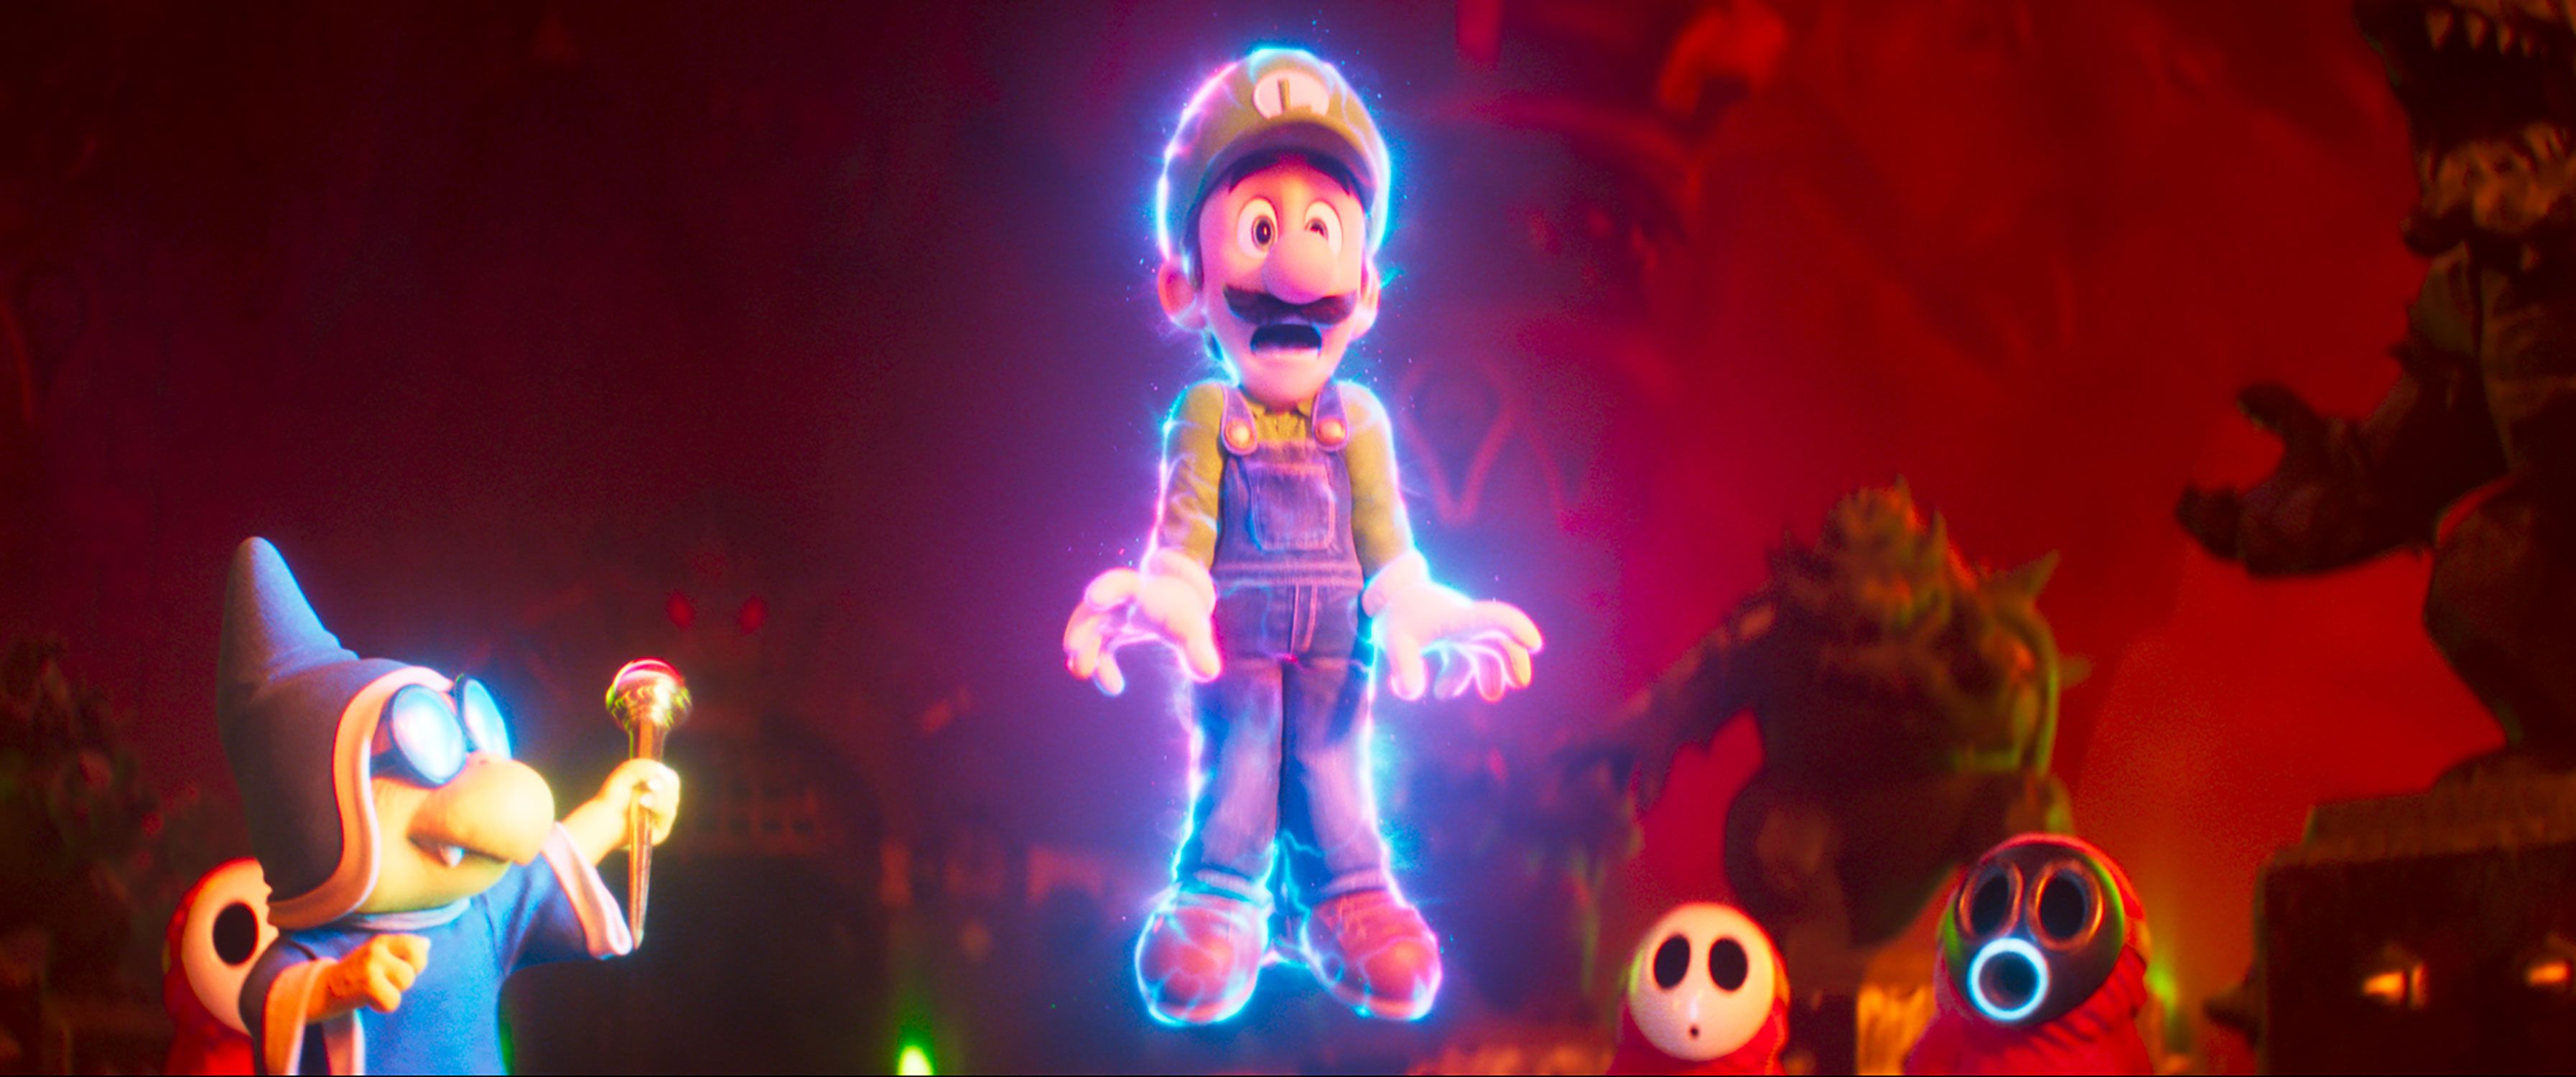 Super Mario Bros. Wonder devs had over 2,000 ideas for the game, including  the addition of an enormous live-action Mario that didn't make the cut